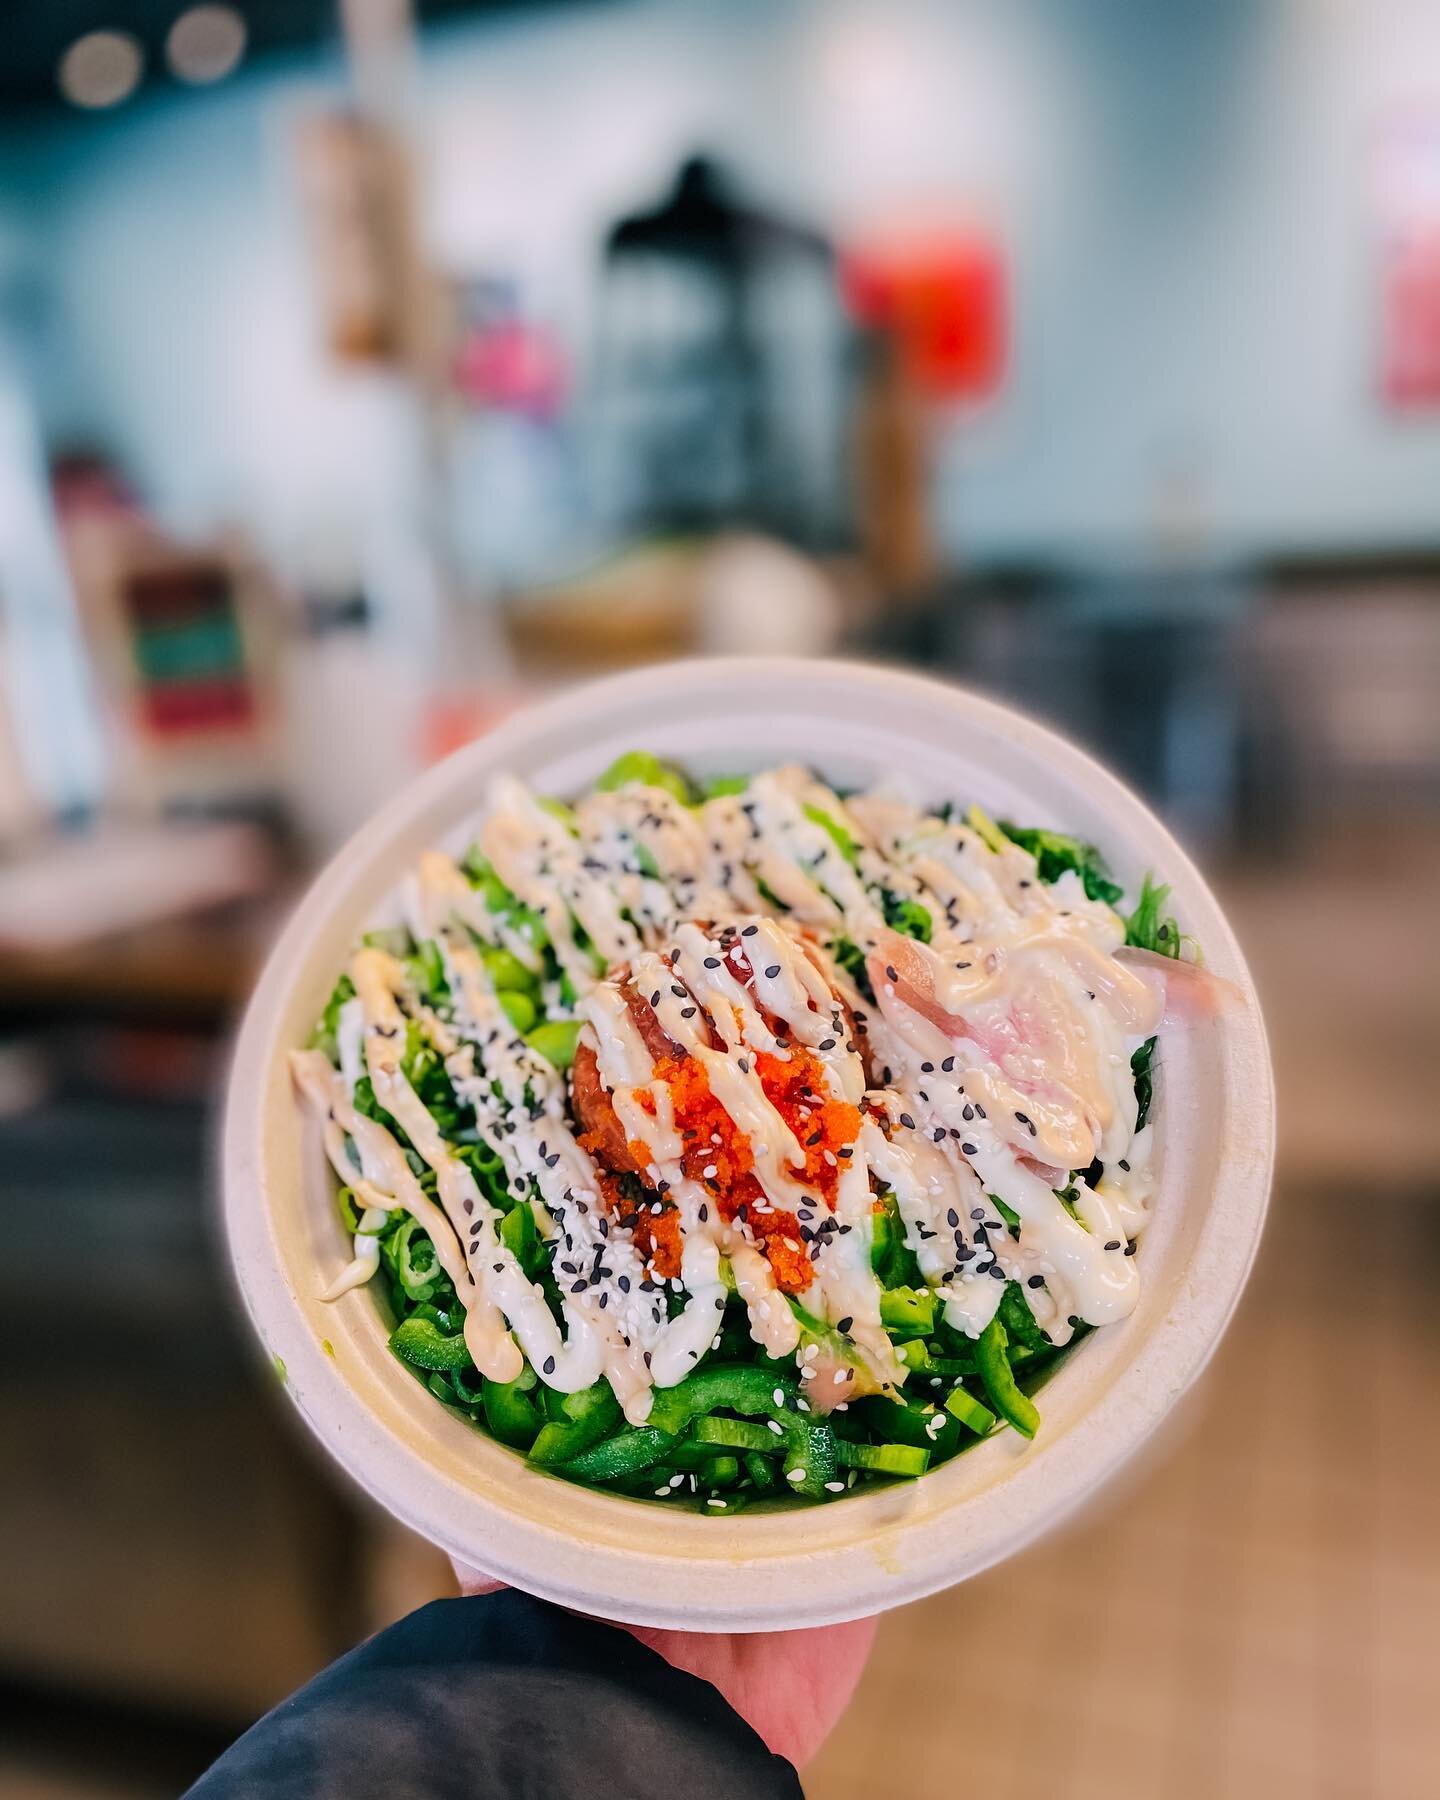 Nothing quite like the Pipeline Bowl 🤤🥰 our signature spicy ahi tuna bowl topped with sriracha maya and wasabi aioli. Let us know your go-to bowl in the comments! 👇